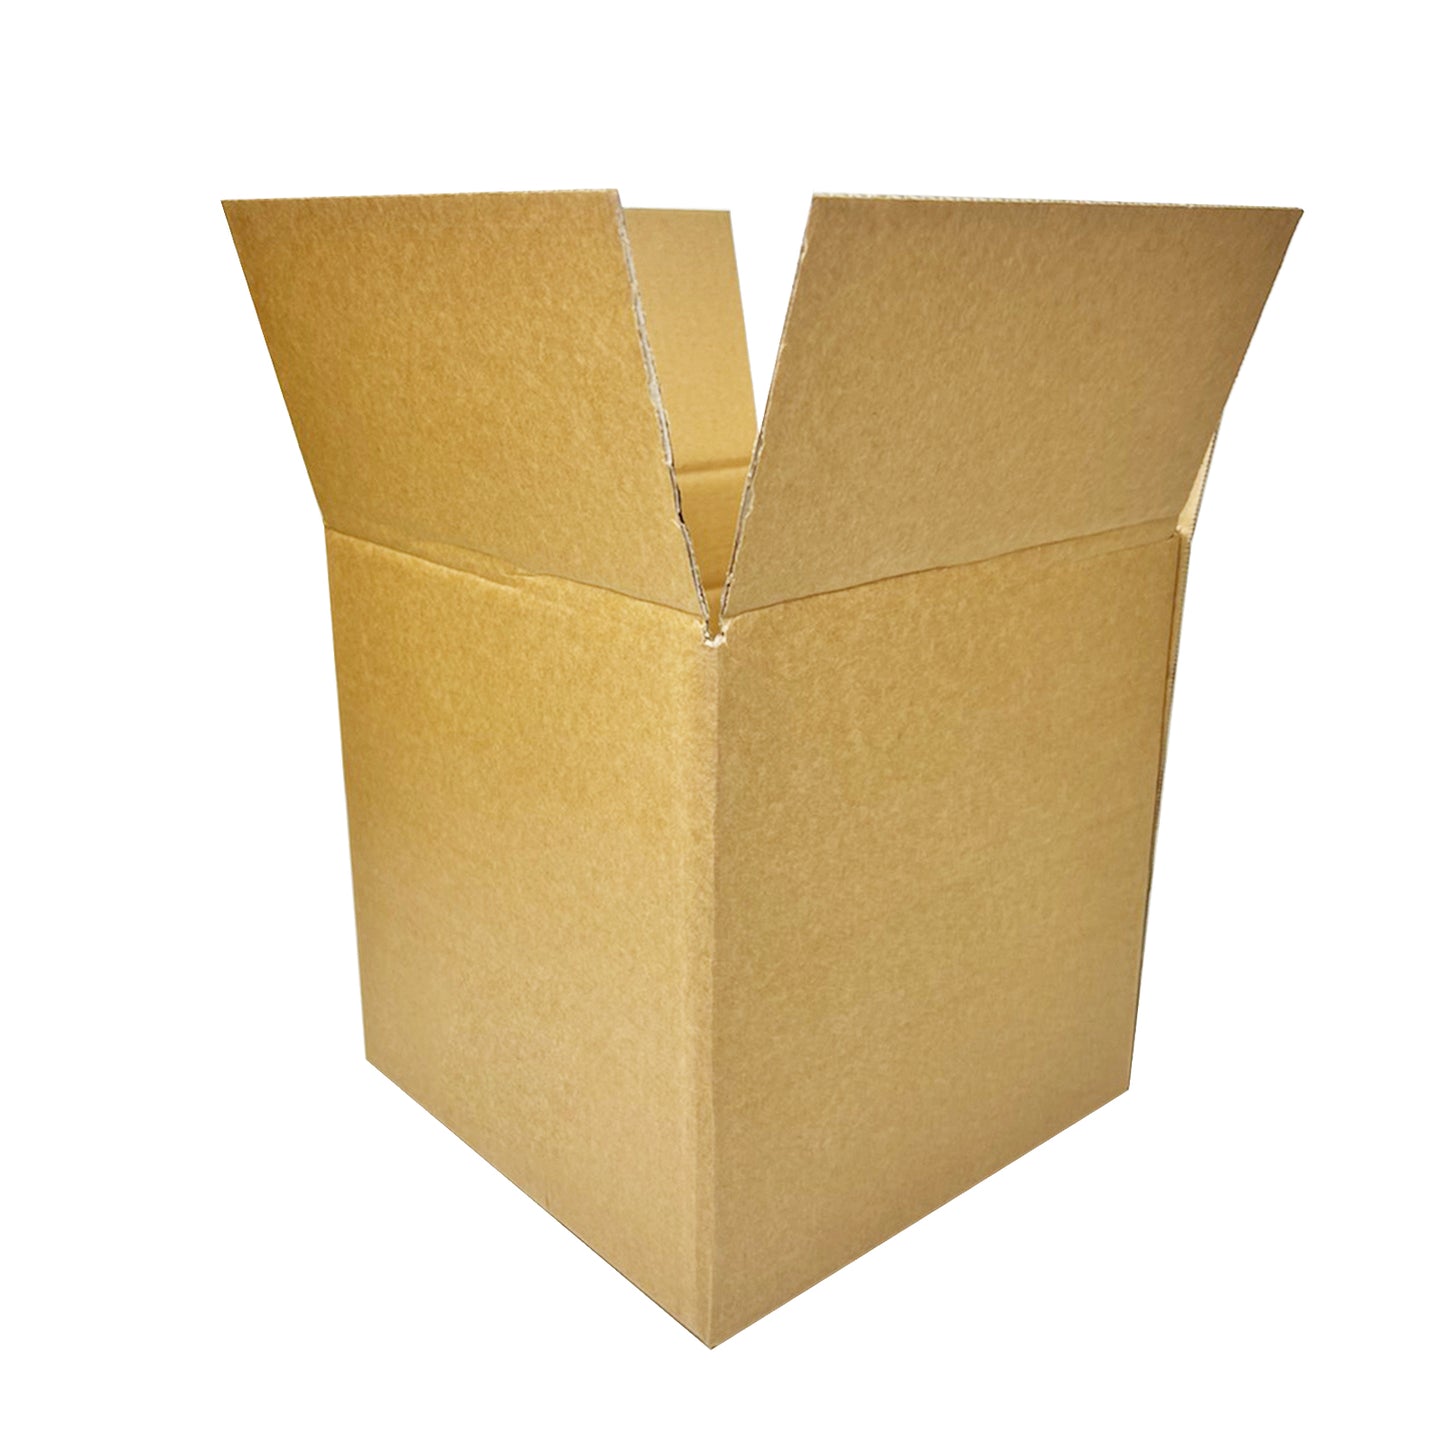 Heavy Duty Single Wall Cardboard Boxes | Manchester Cardboard Boxes